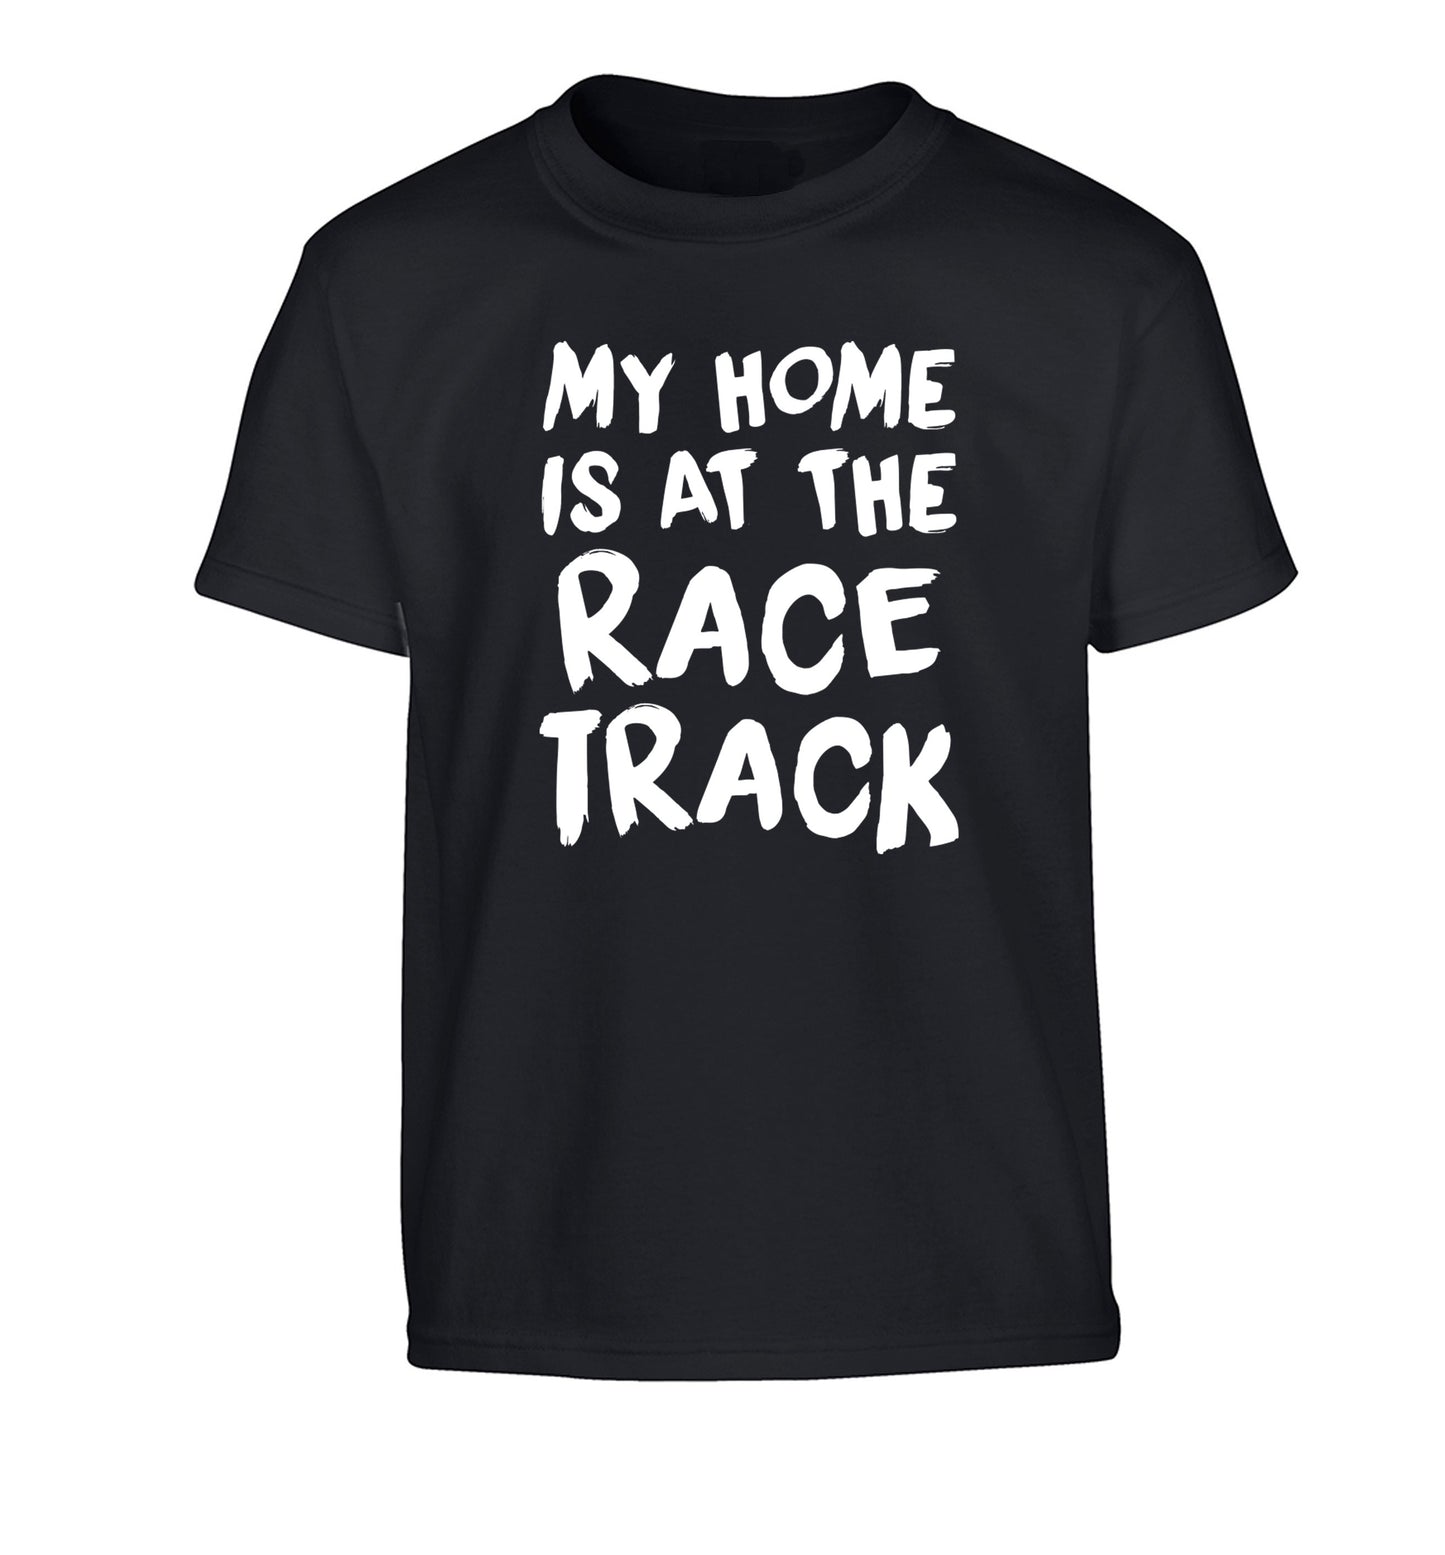 My home is at the race track Children's black Tshirt 12-14 Years